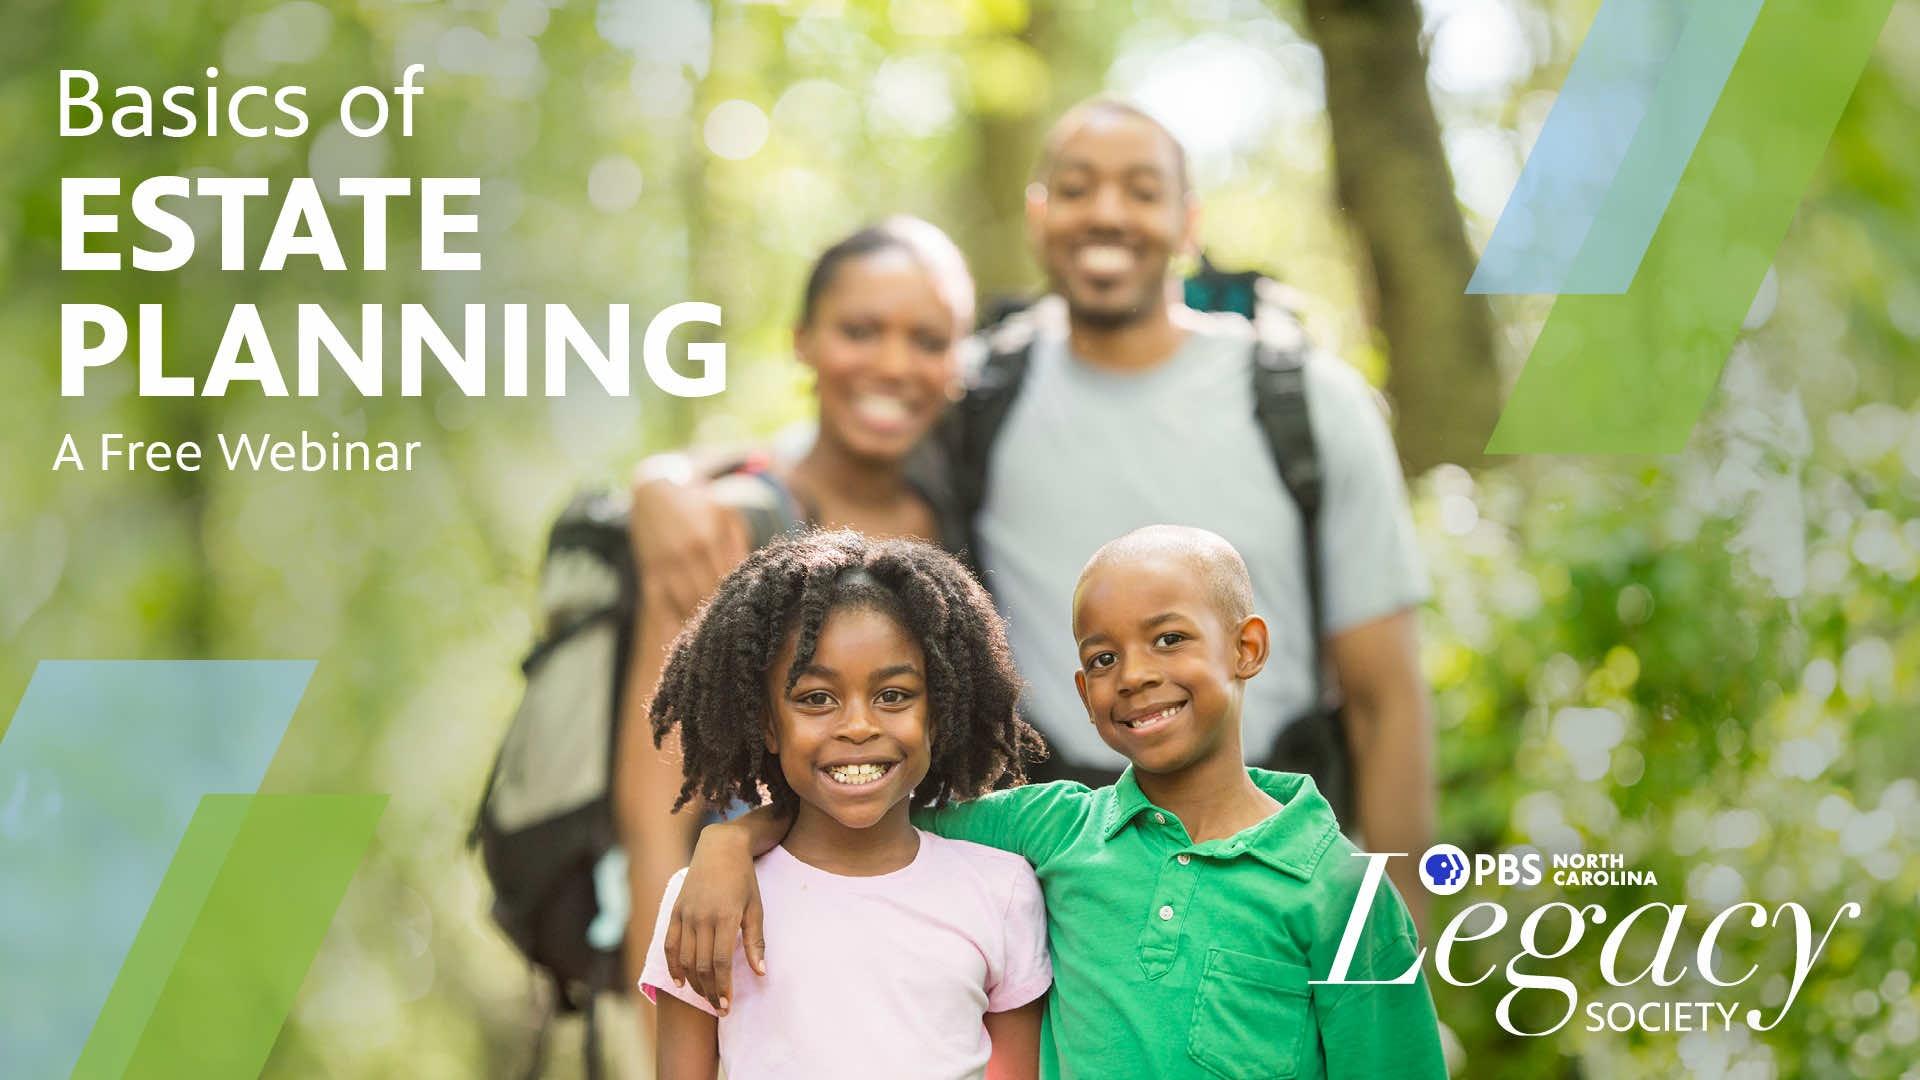 A black family of a mother, father, son and daughter with the text, "Basics of Estate Planning A Free Webinar" and the PBS North Carolina Legacy logo on it.